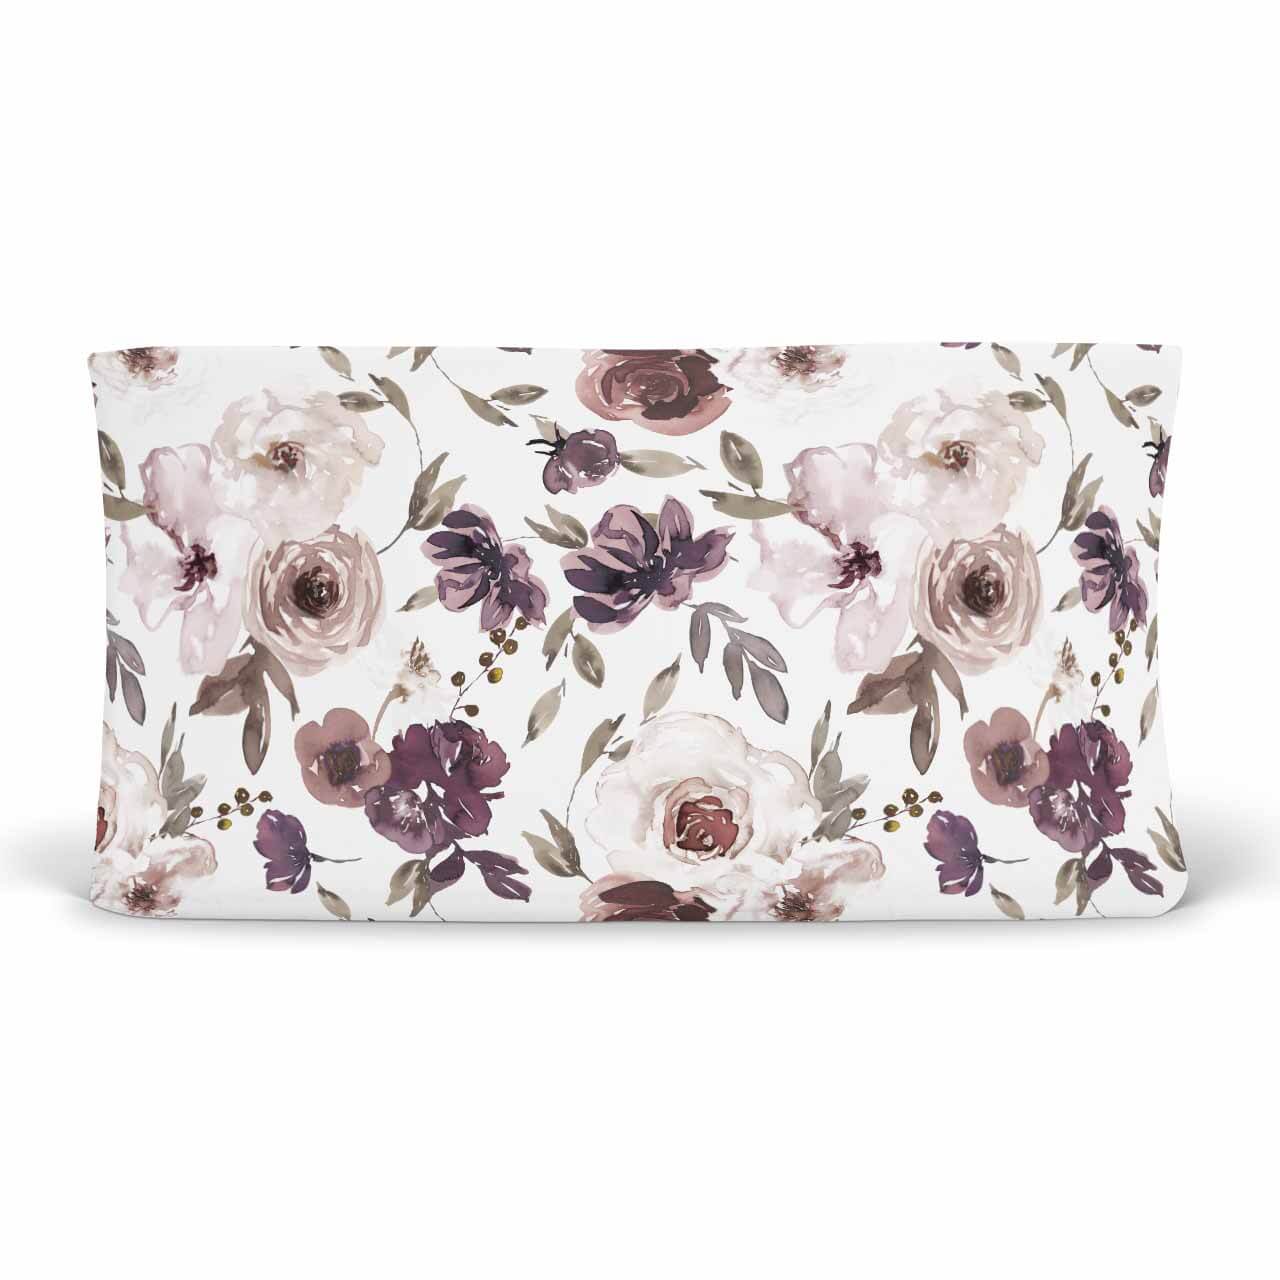  JOYIT 60 Sheets Pink Flower Wrapping Paper Bouquet